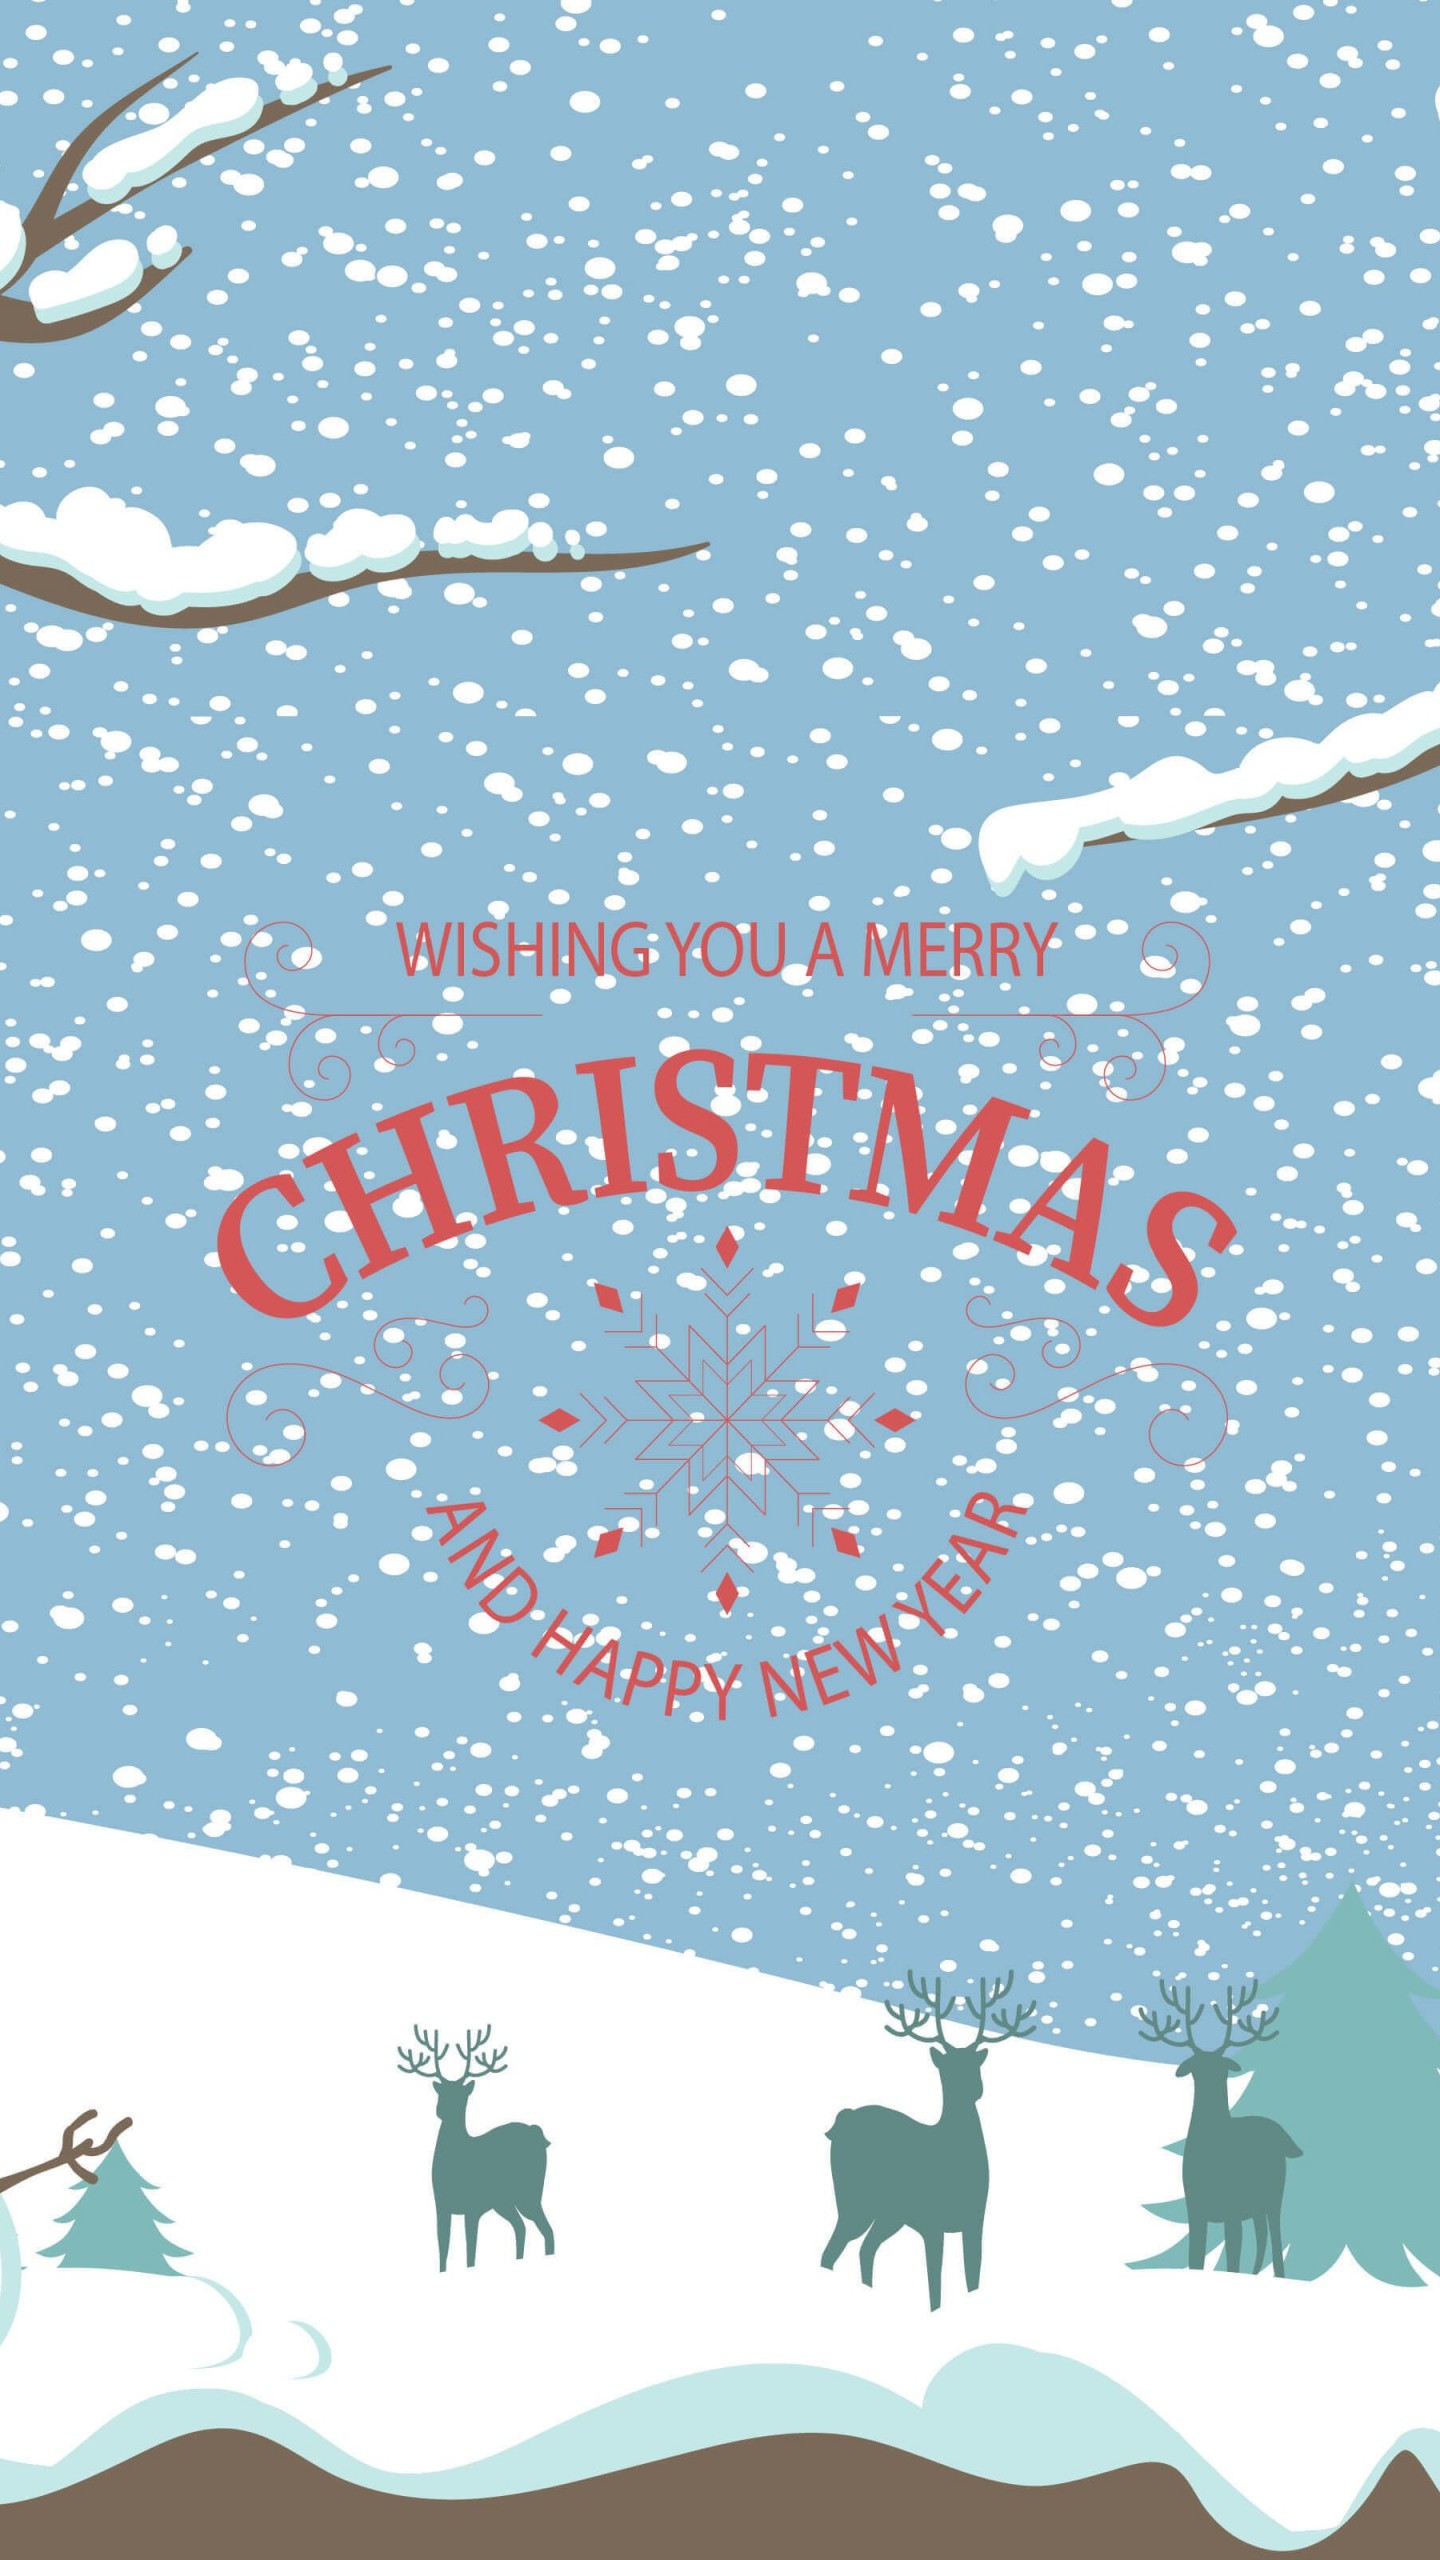 Merry Christmas Illustration Wallpaper for SAMSUNG Galaxy Note 4